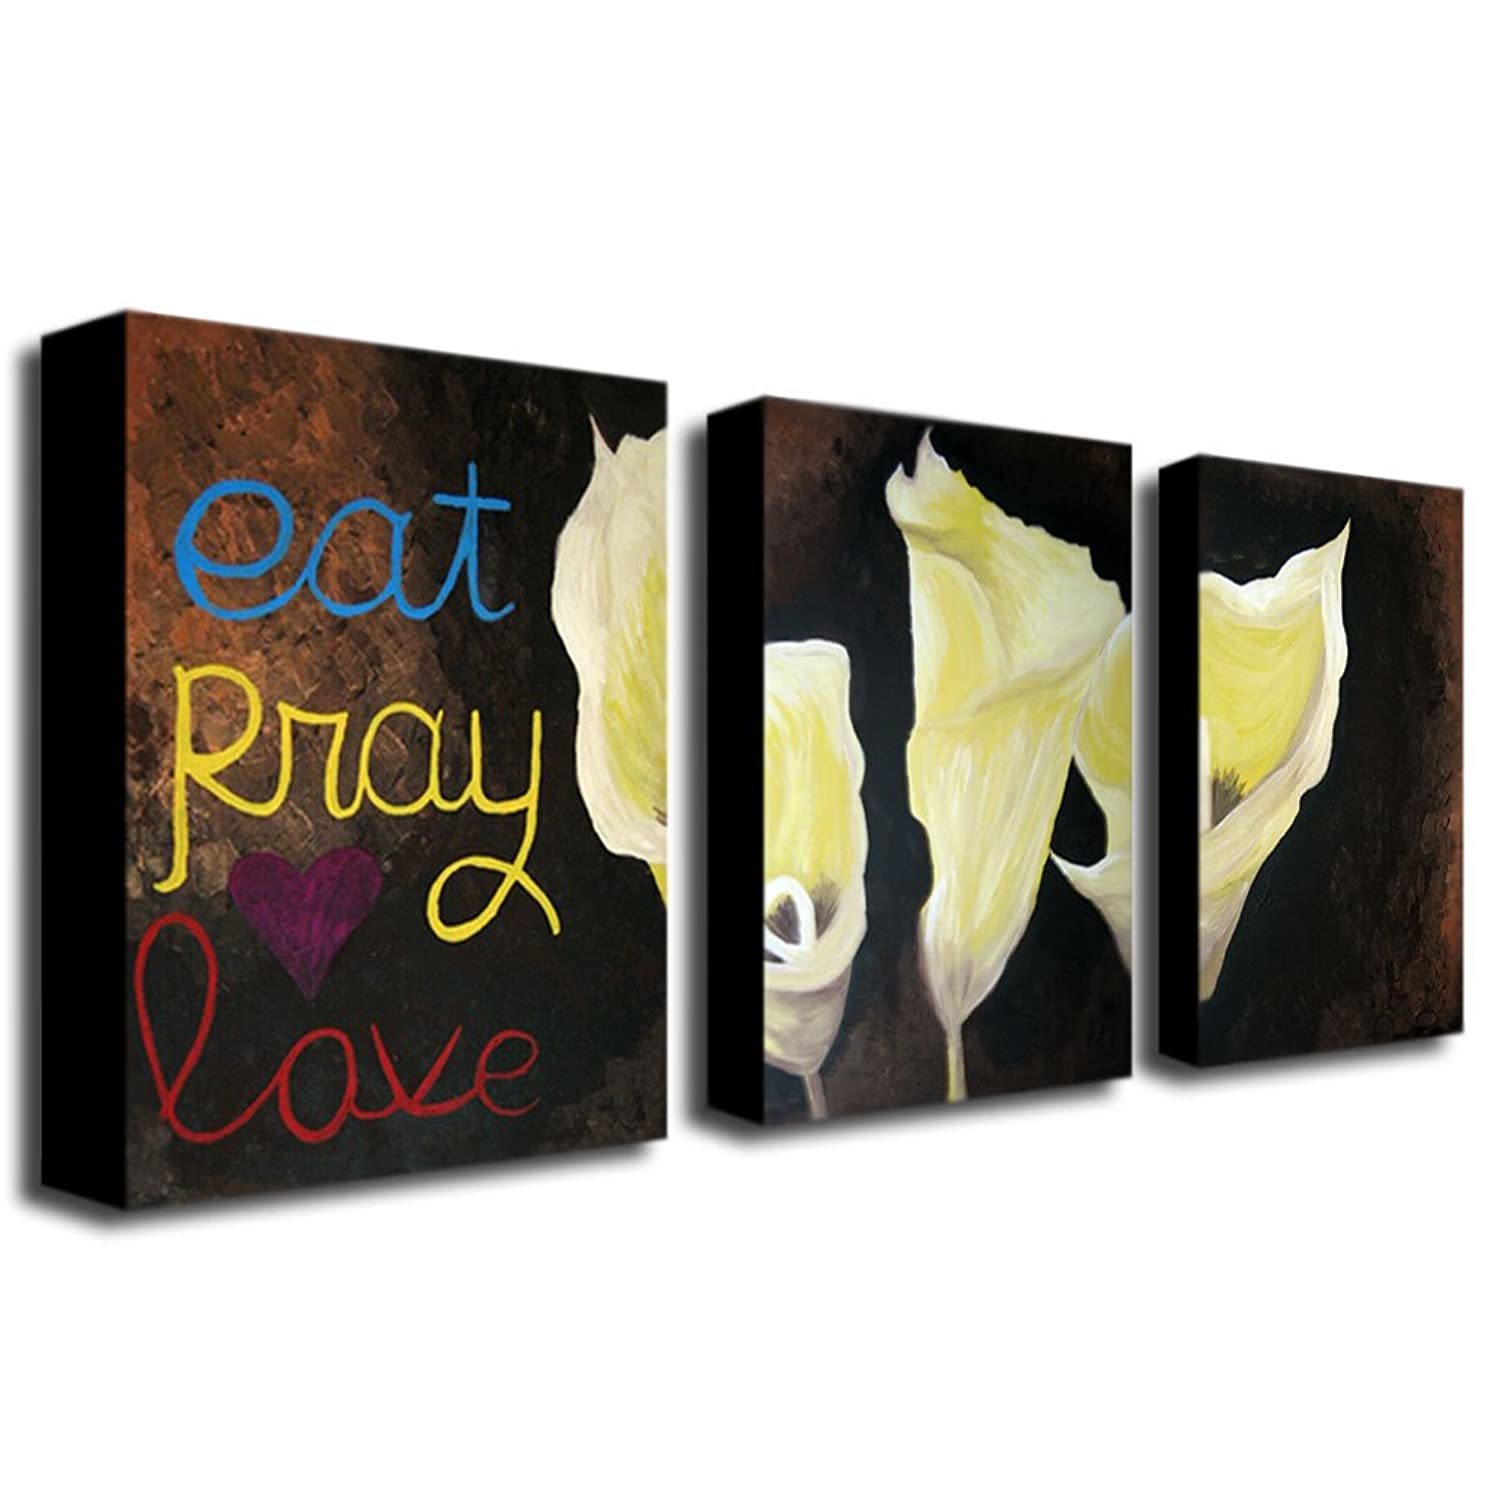 Primary image for Eat Pray Love By Amanda Rea Canvas Wall Art, Three 14X19-Inch..